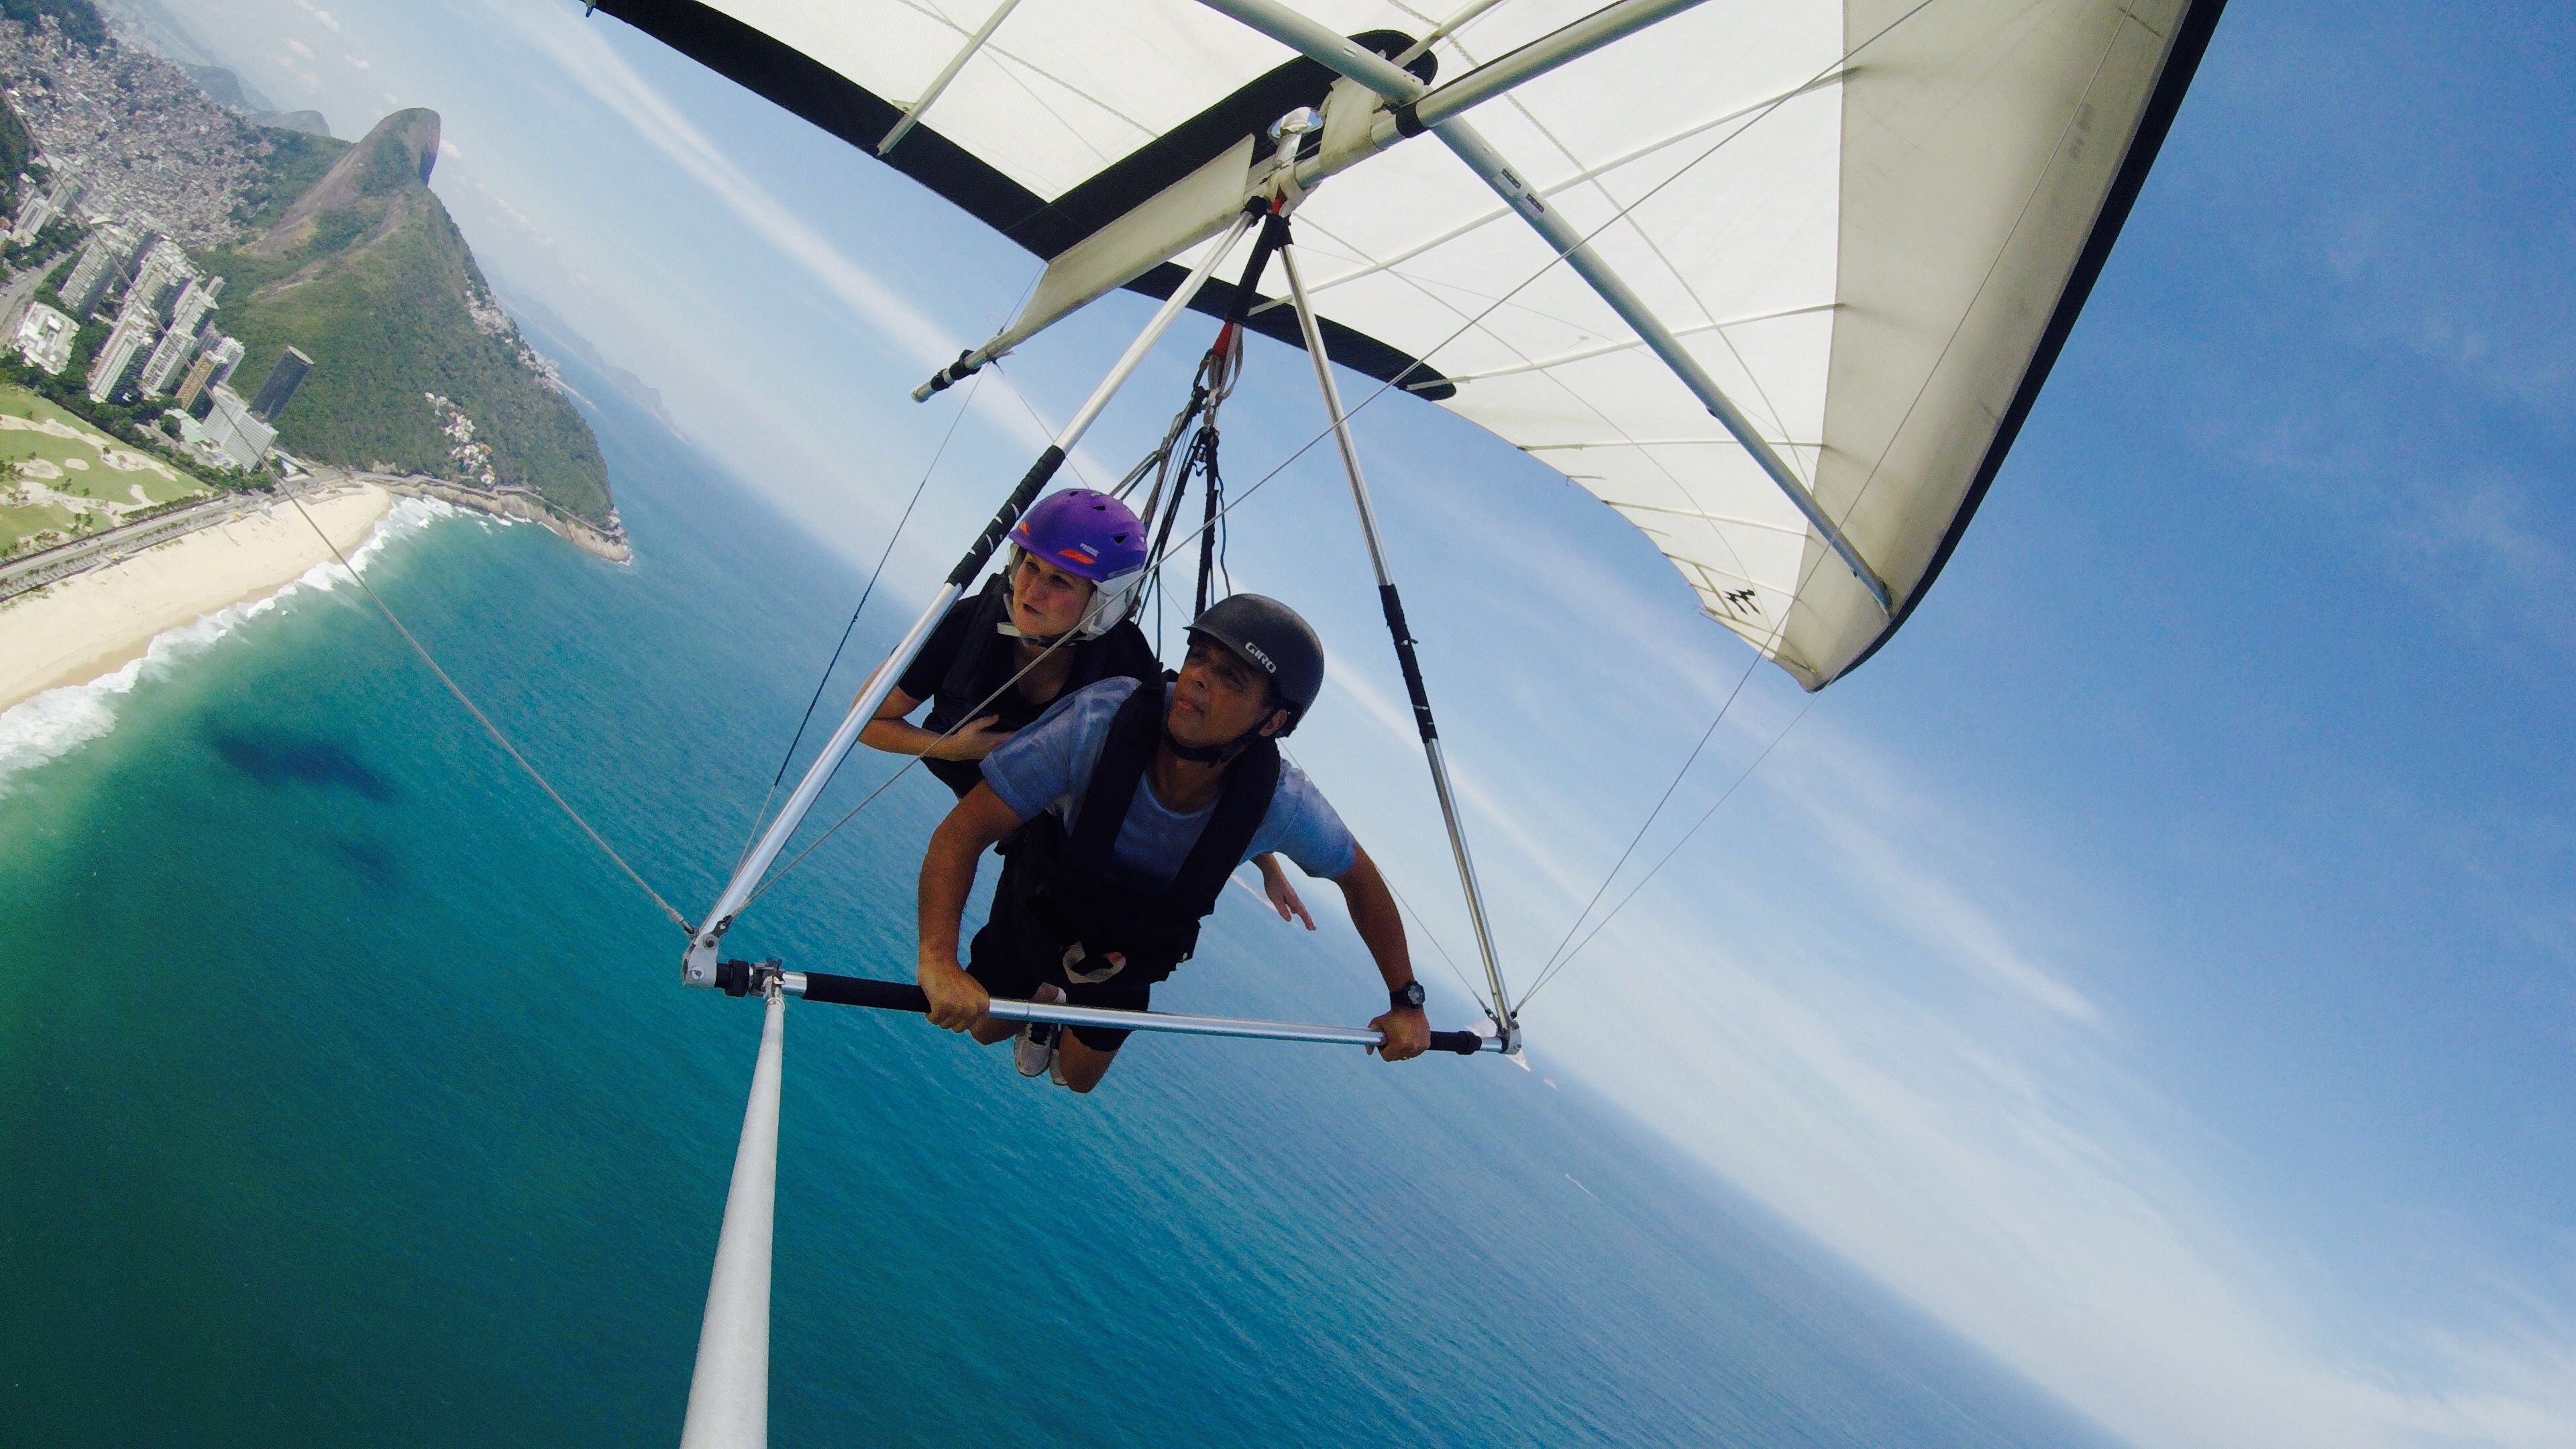 Hang Gliding: Adventure, Tandem, Instructor, Hangglider sailcloth, Light weight, Durability in a sail. 3840x2160 4K Background.